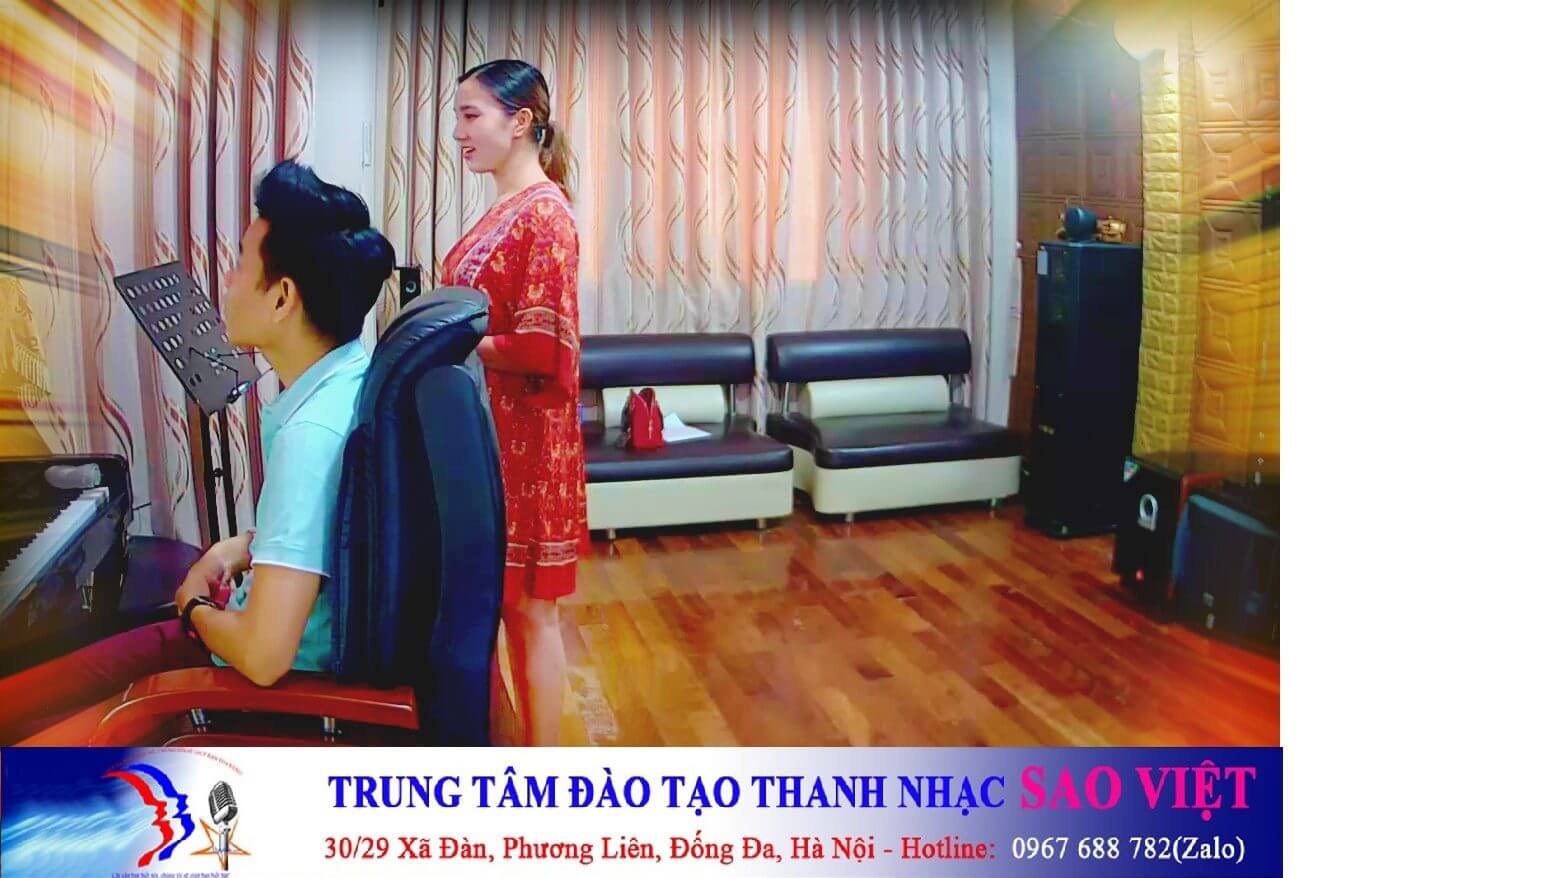 dia-chi-dao-tao-thanh-nhac-chat-luong